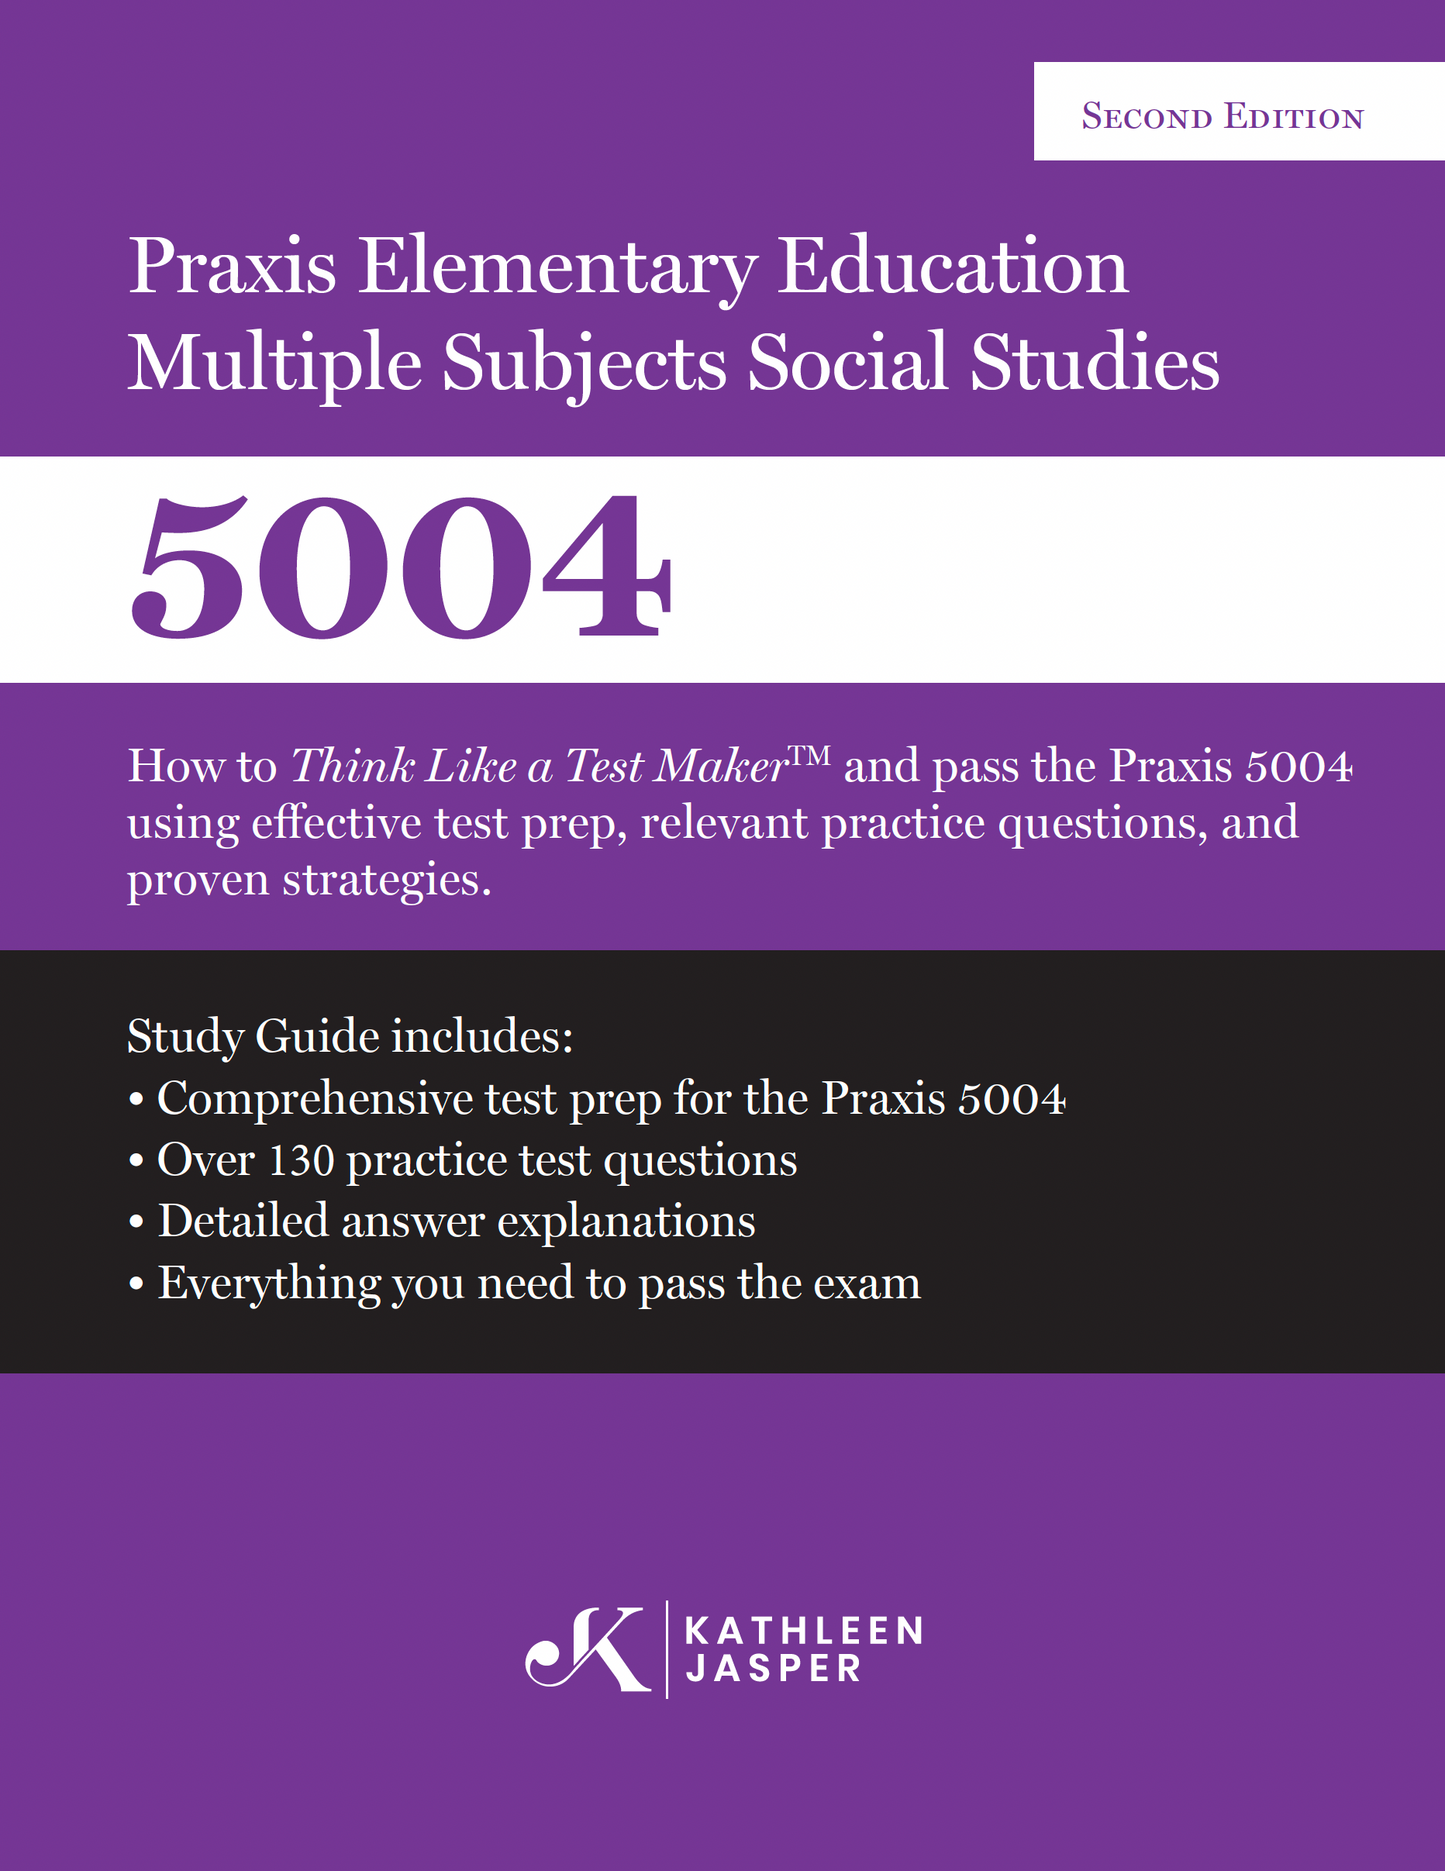 Praxis Elementary Education Multiple Subjects Social Studies 5004